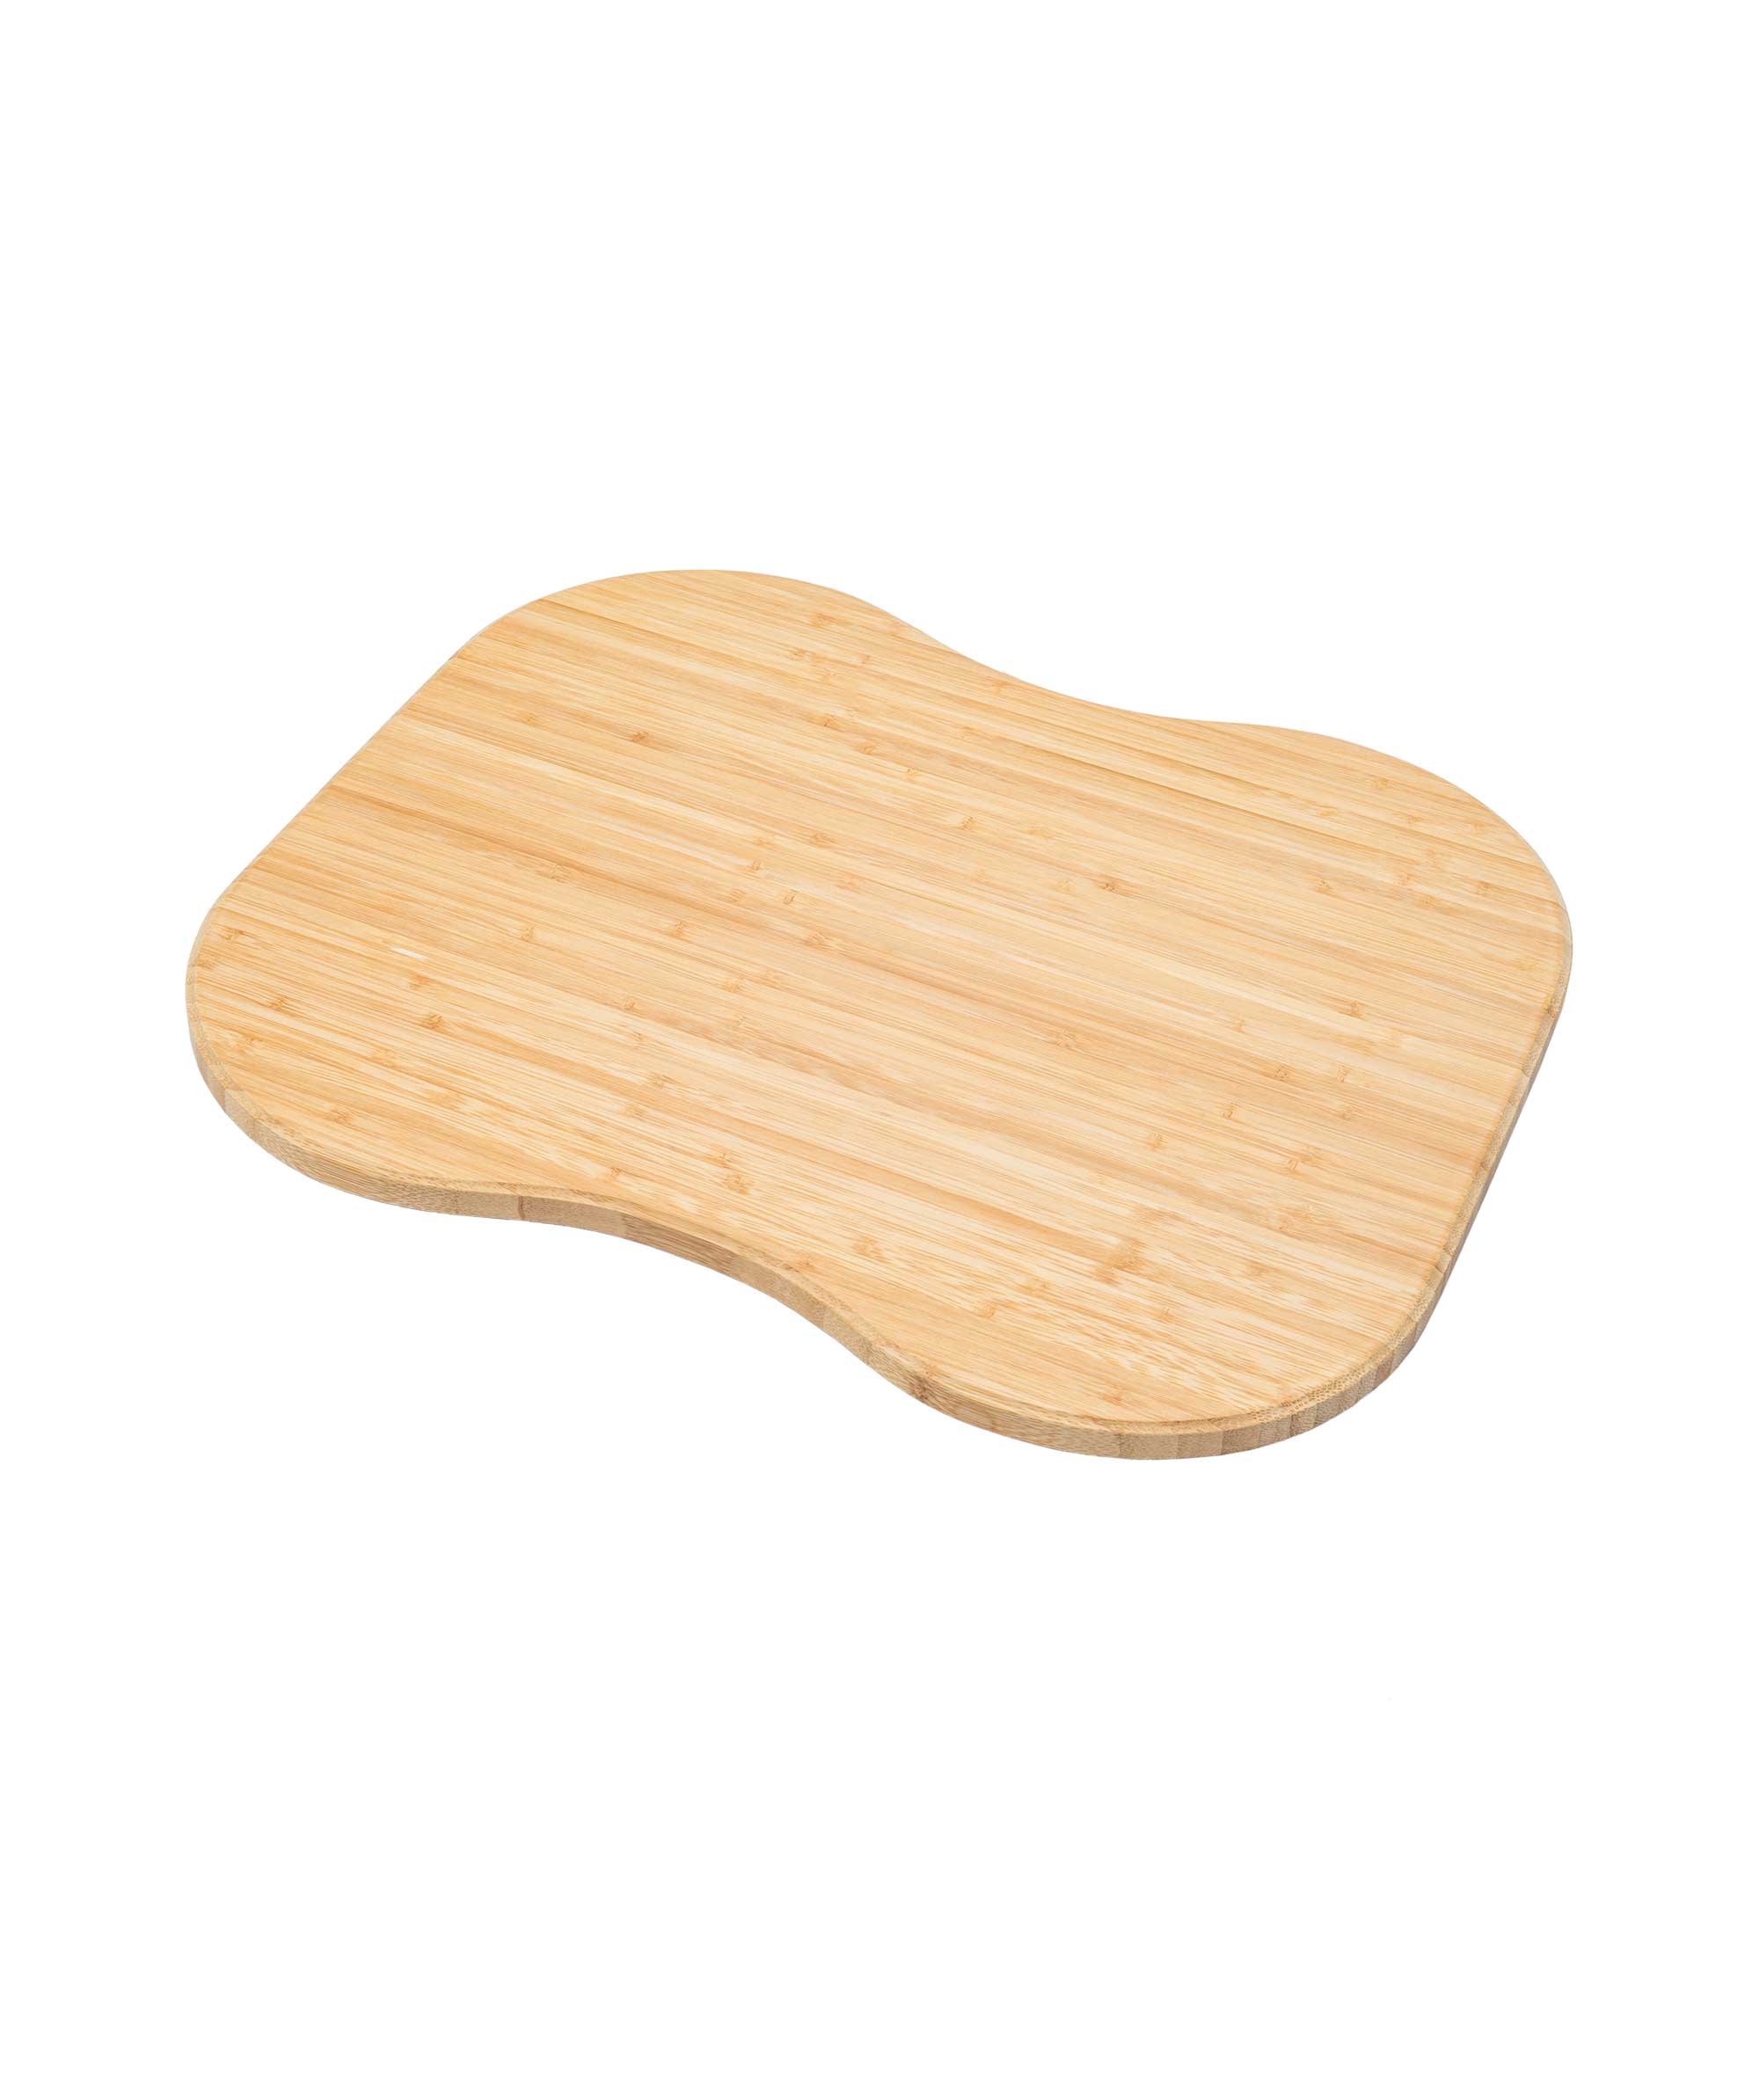 Cutting Board 01 - for Acero 800, 980, 1080 and 1200